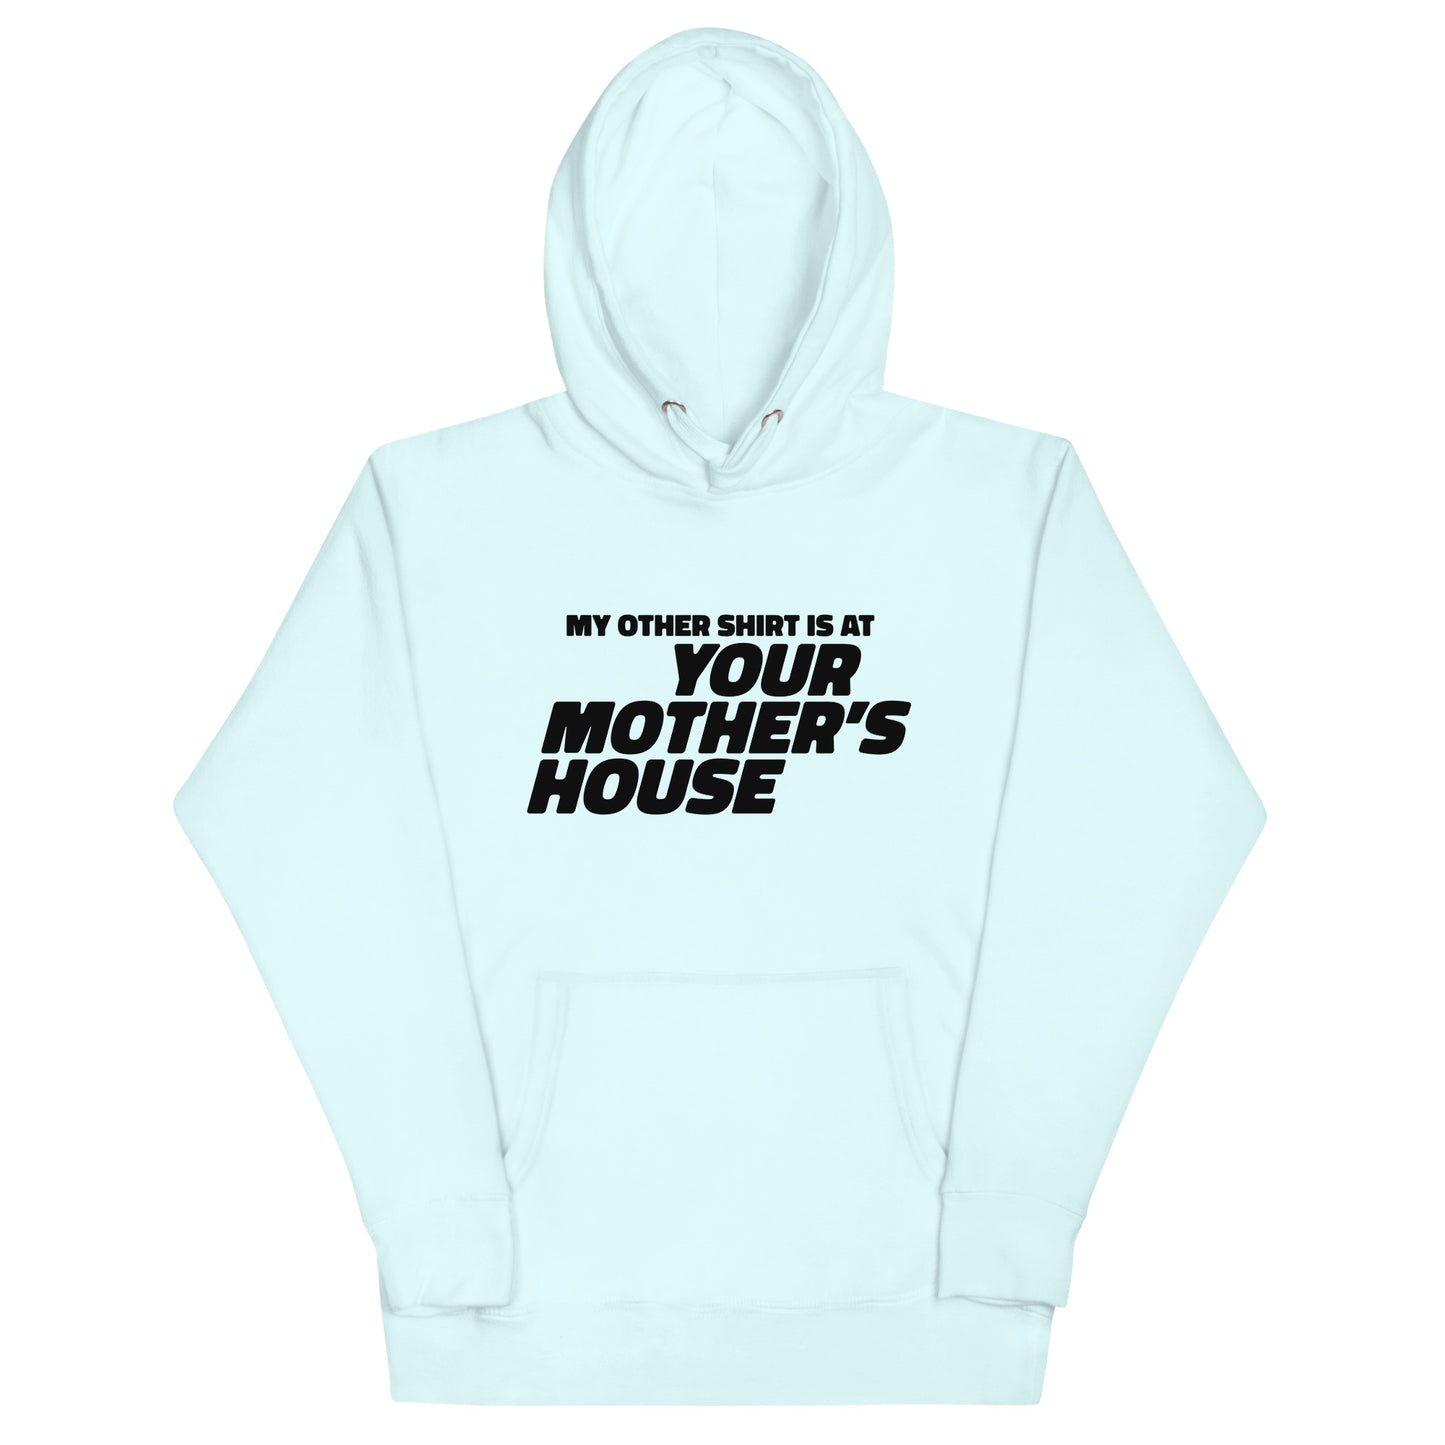 My Other Shirt is at Your Mother's House Unisex Hoodie